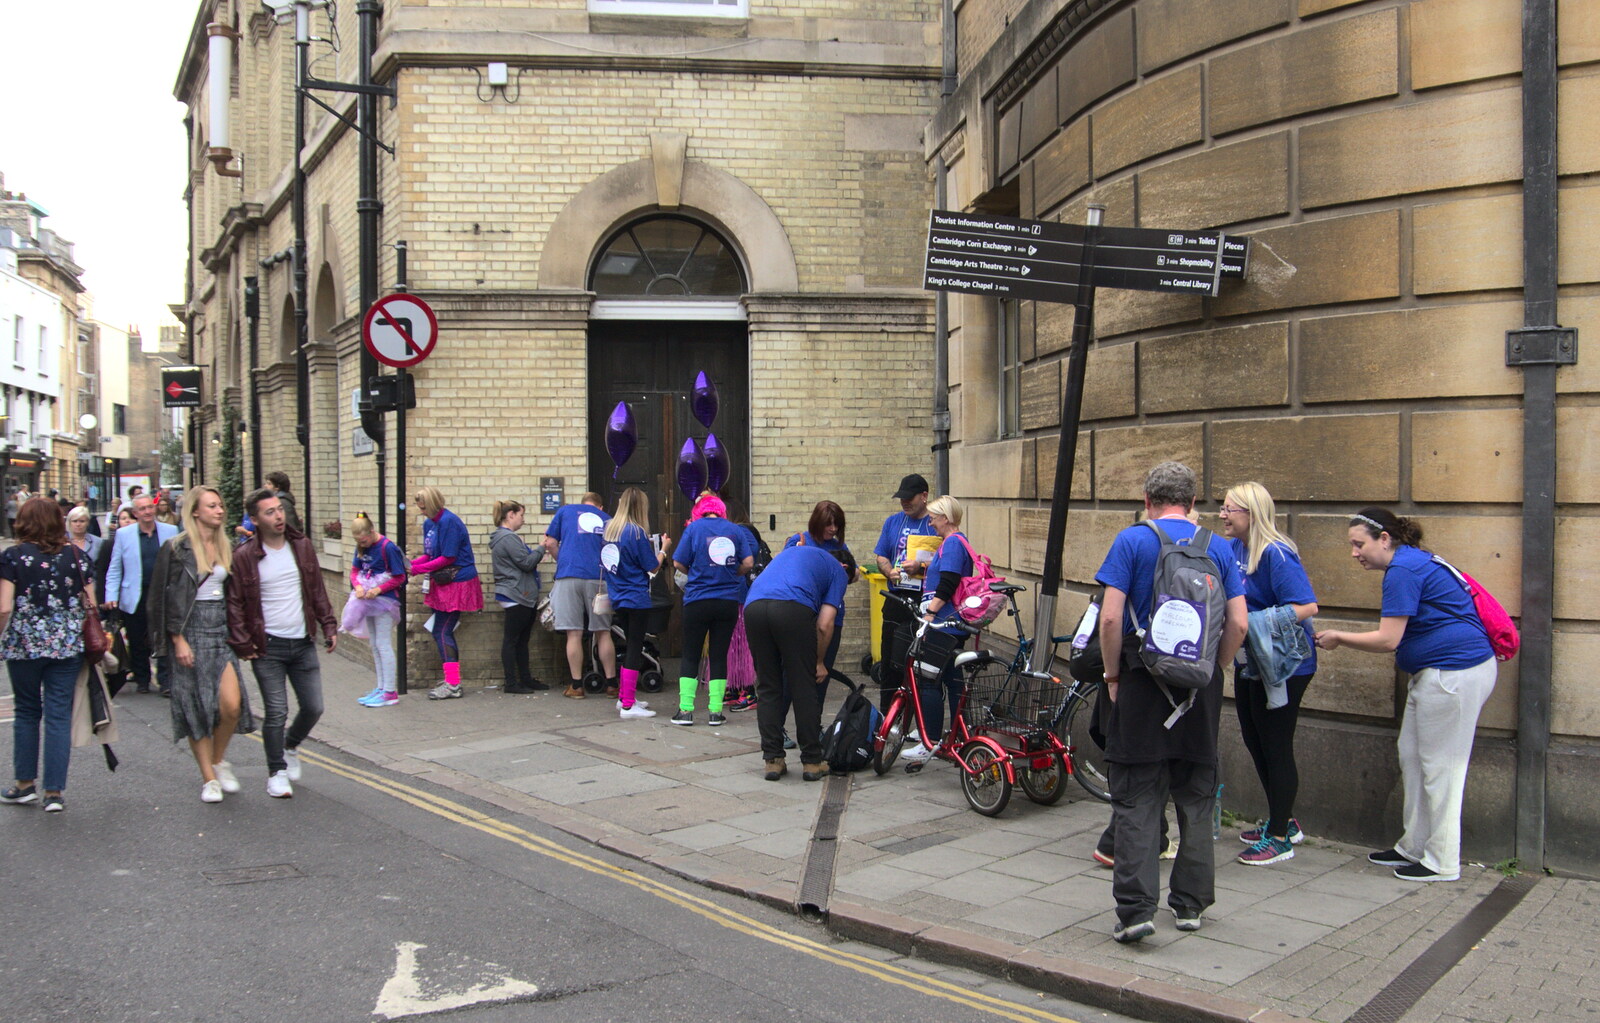 Sponsored walkers on Corn Exchange Street from The Retro Computer Festival, Centre For Computing History, Cambridge - 15th September 2018